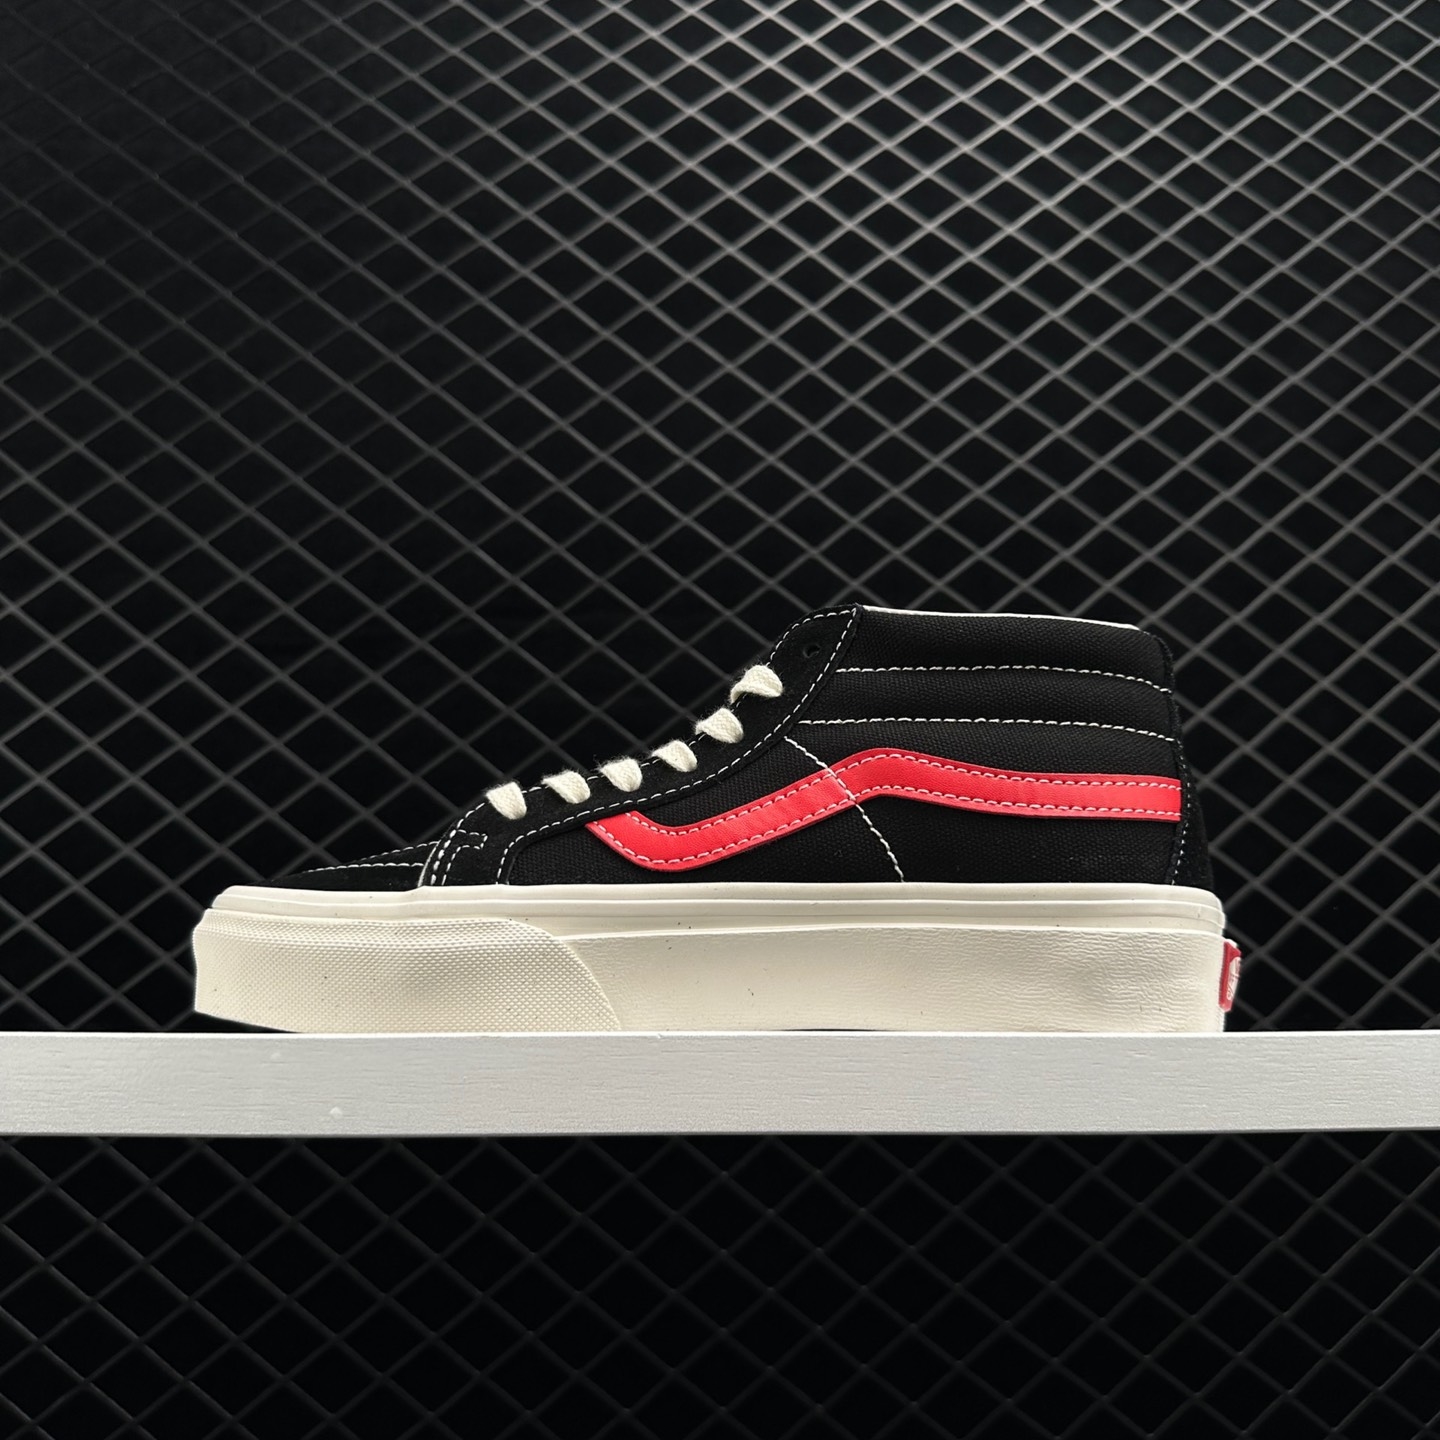 Vans SK8-Mid Black-Red 'Black Red' VN0A391FTP2: Stylish and Bold Skate Shoes